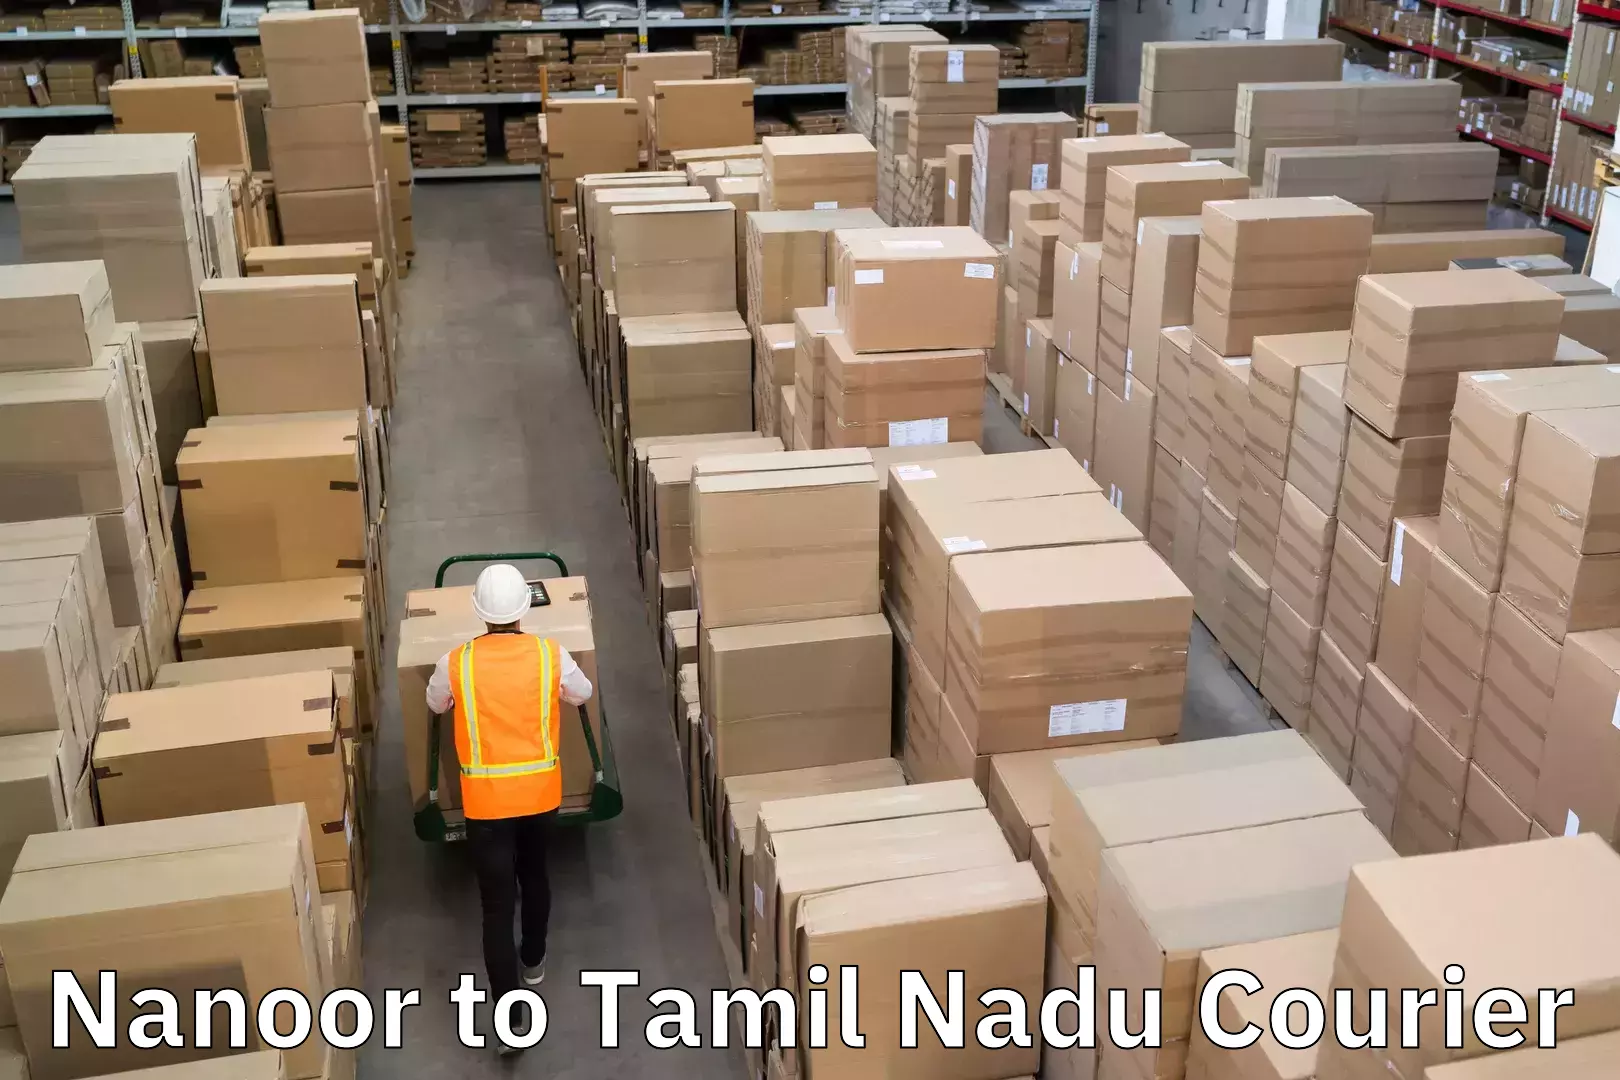 Express delivery capabilities in Nanoor to Chennai Port